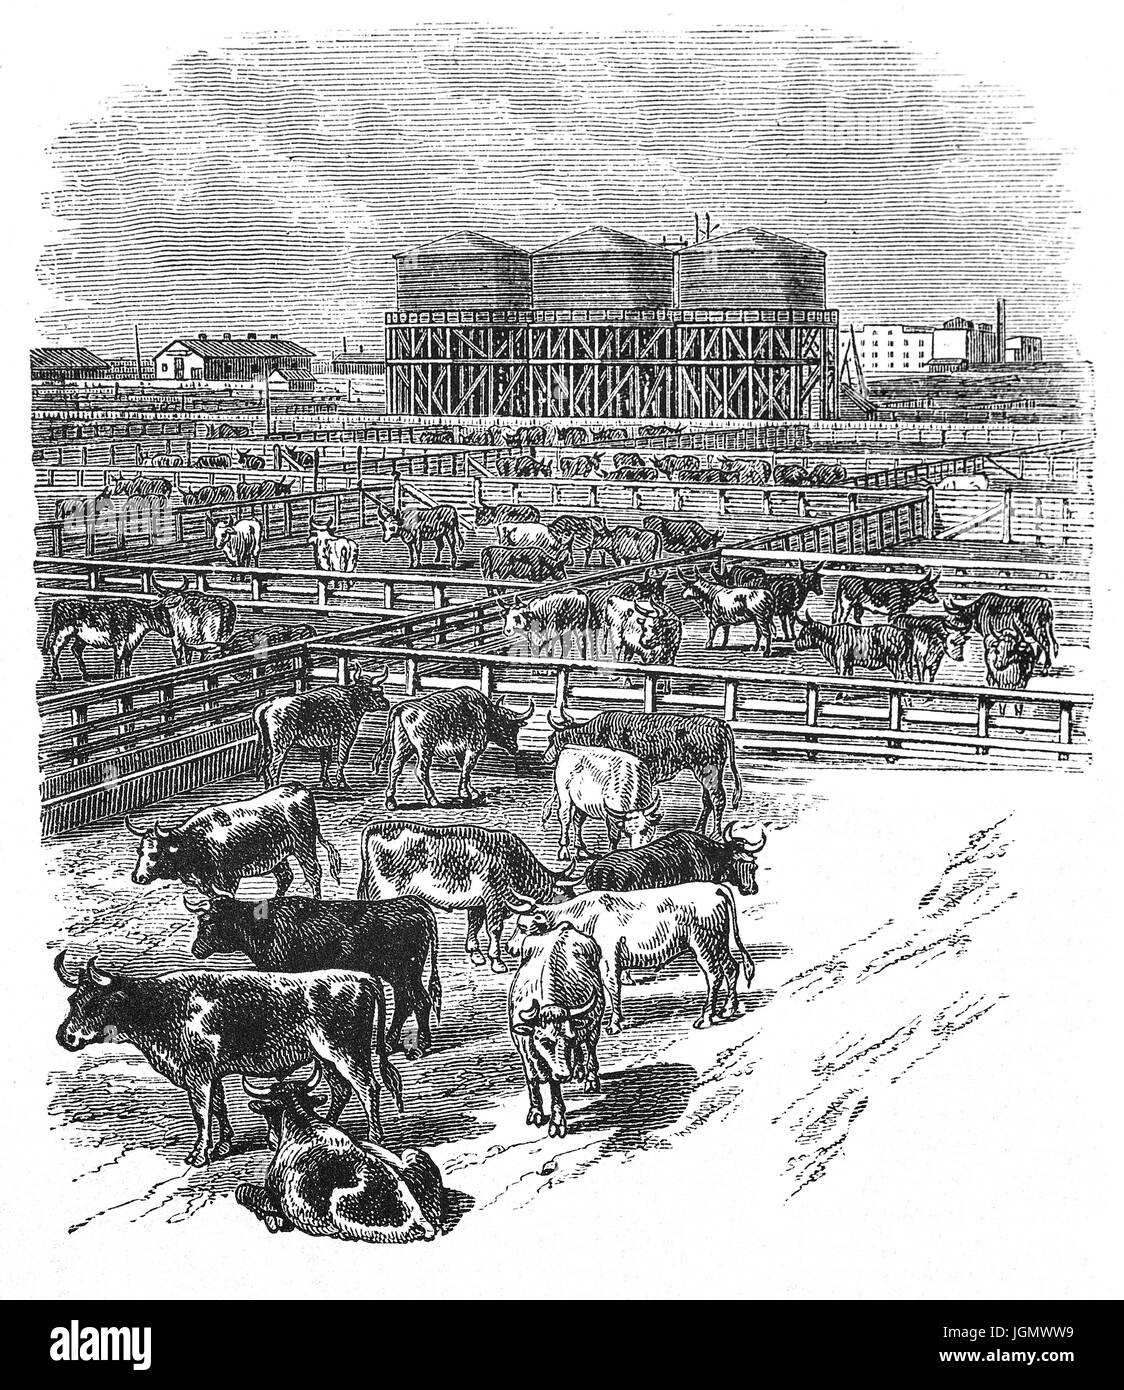 1879: Cattle in the Stockyards of Chicago, Illinois, United States of America Stock Photo